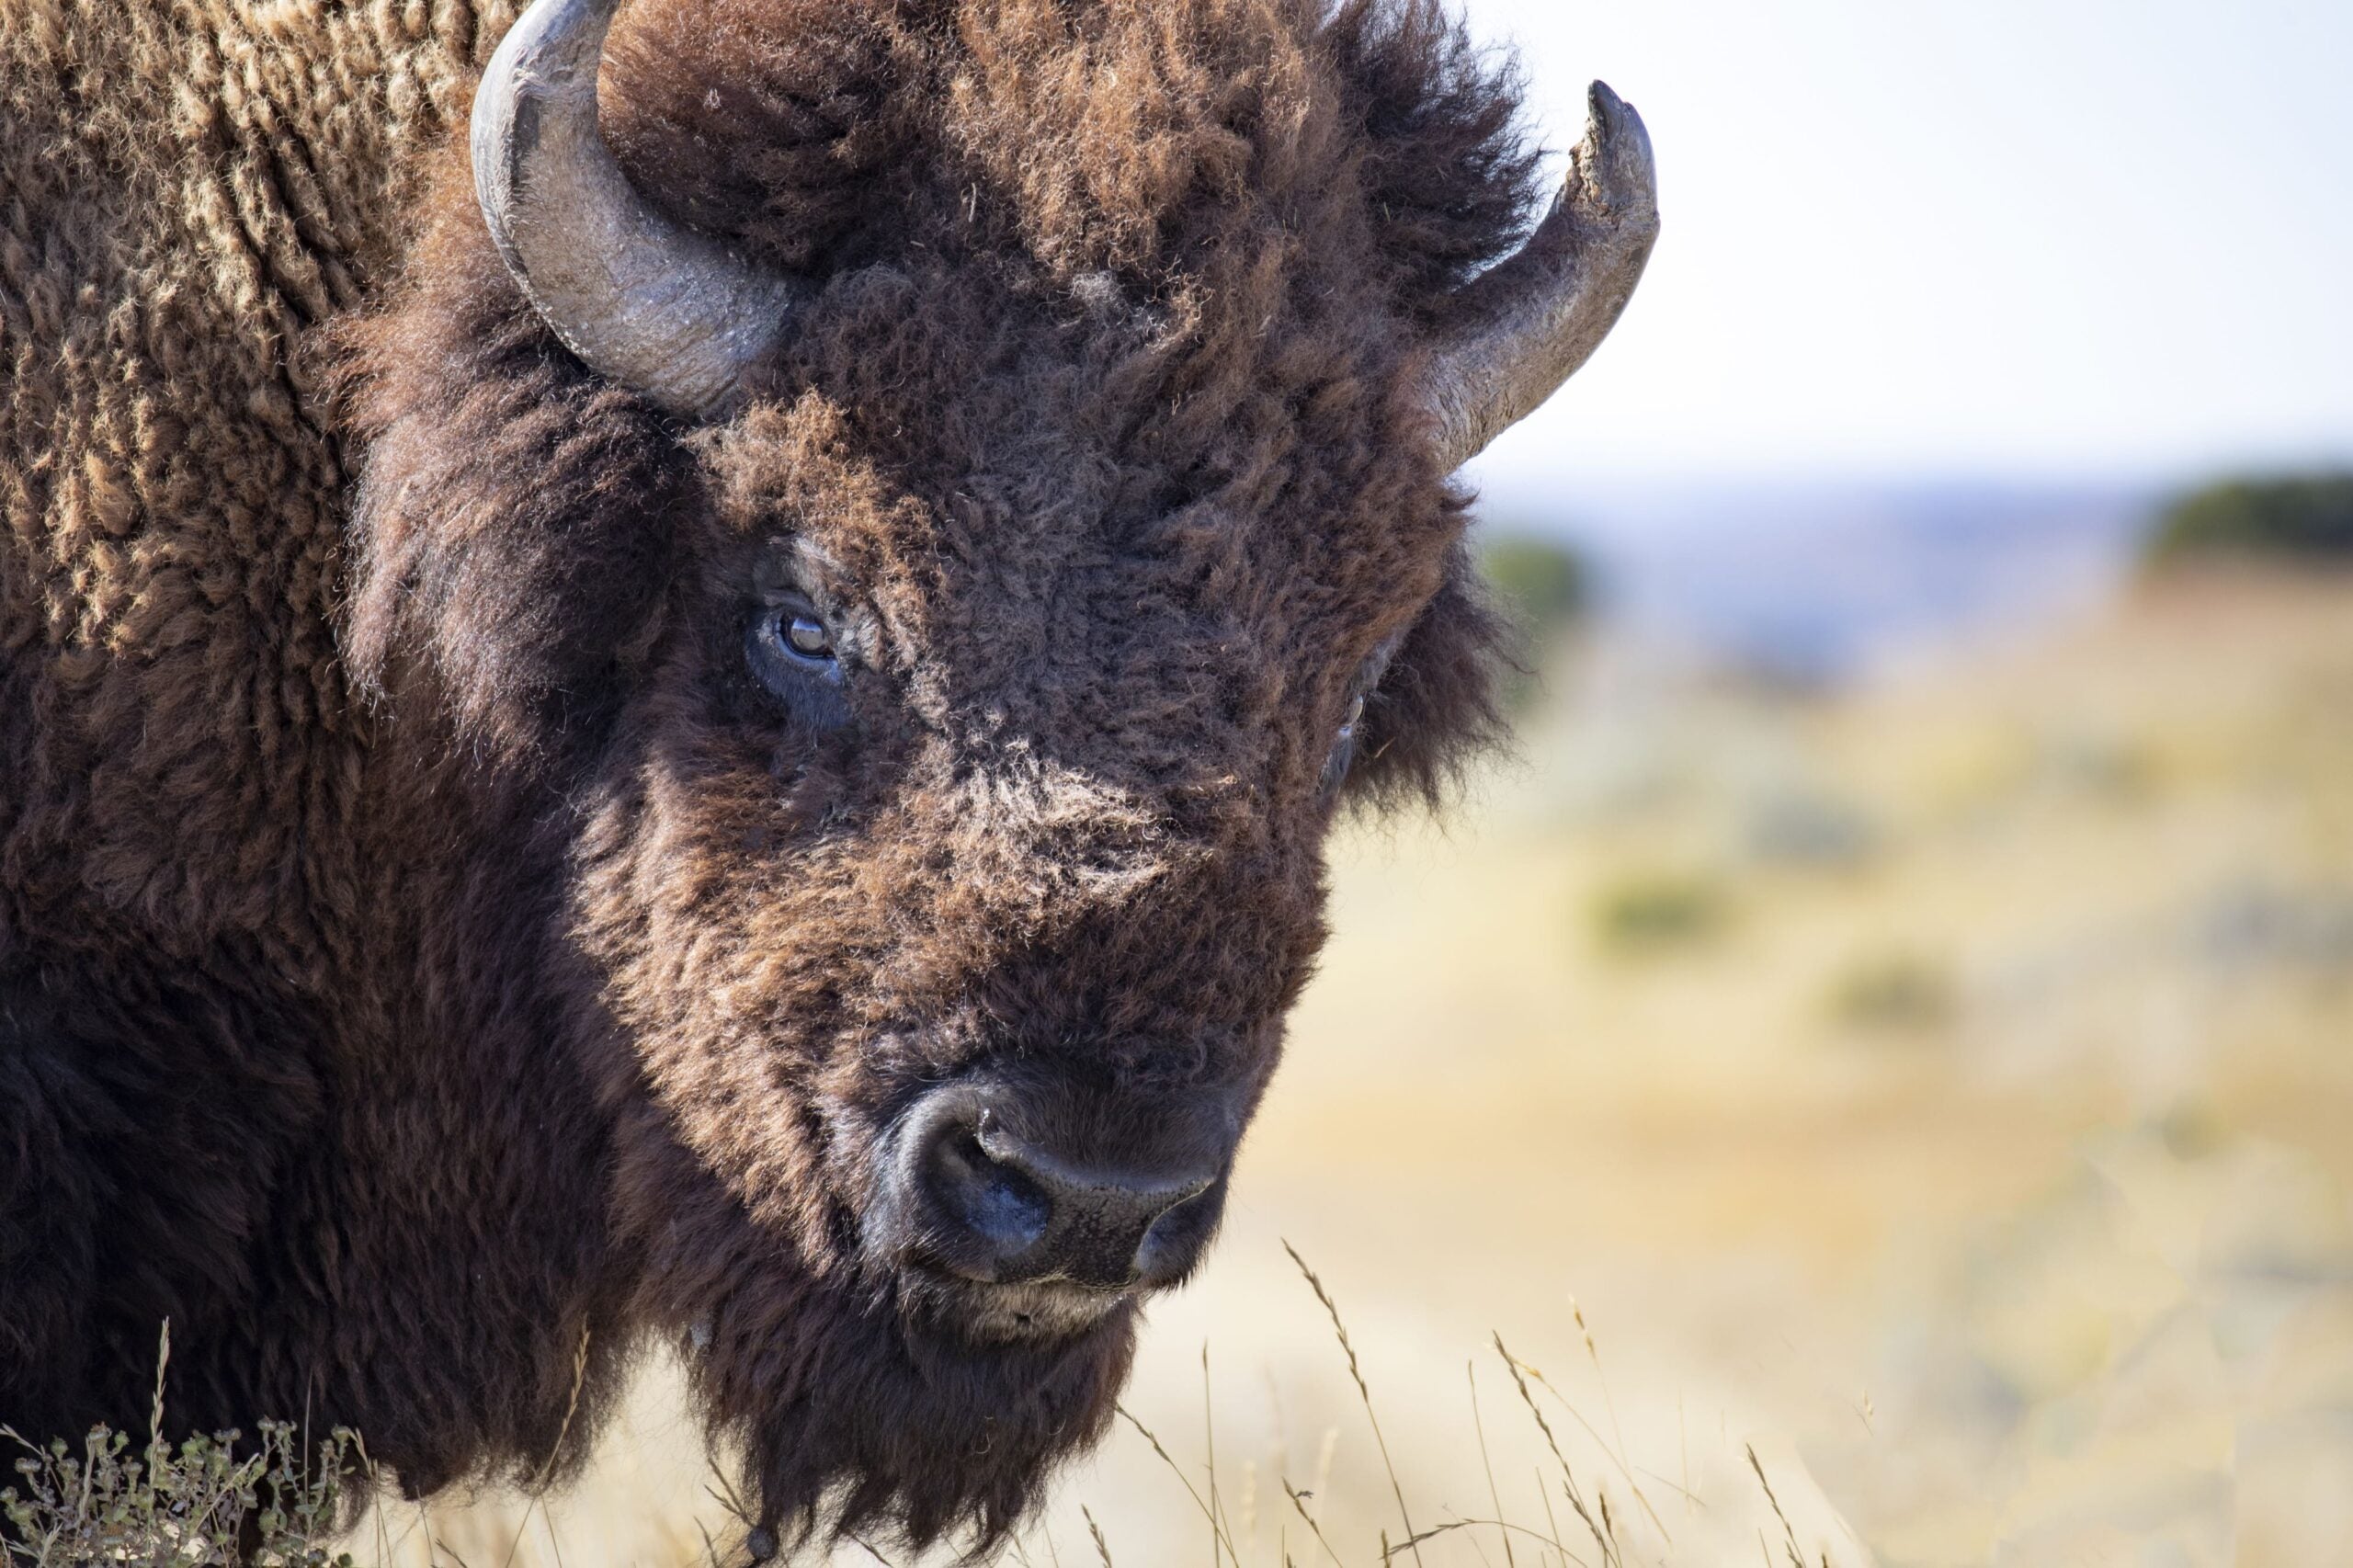 The Meaning of the Buffalo to Our People, by B The Change